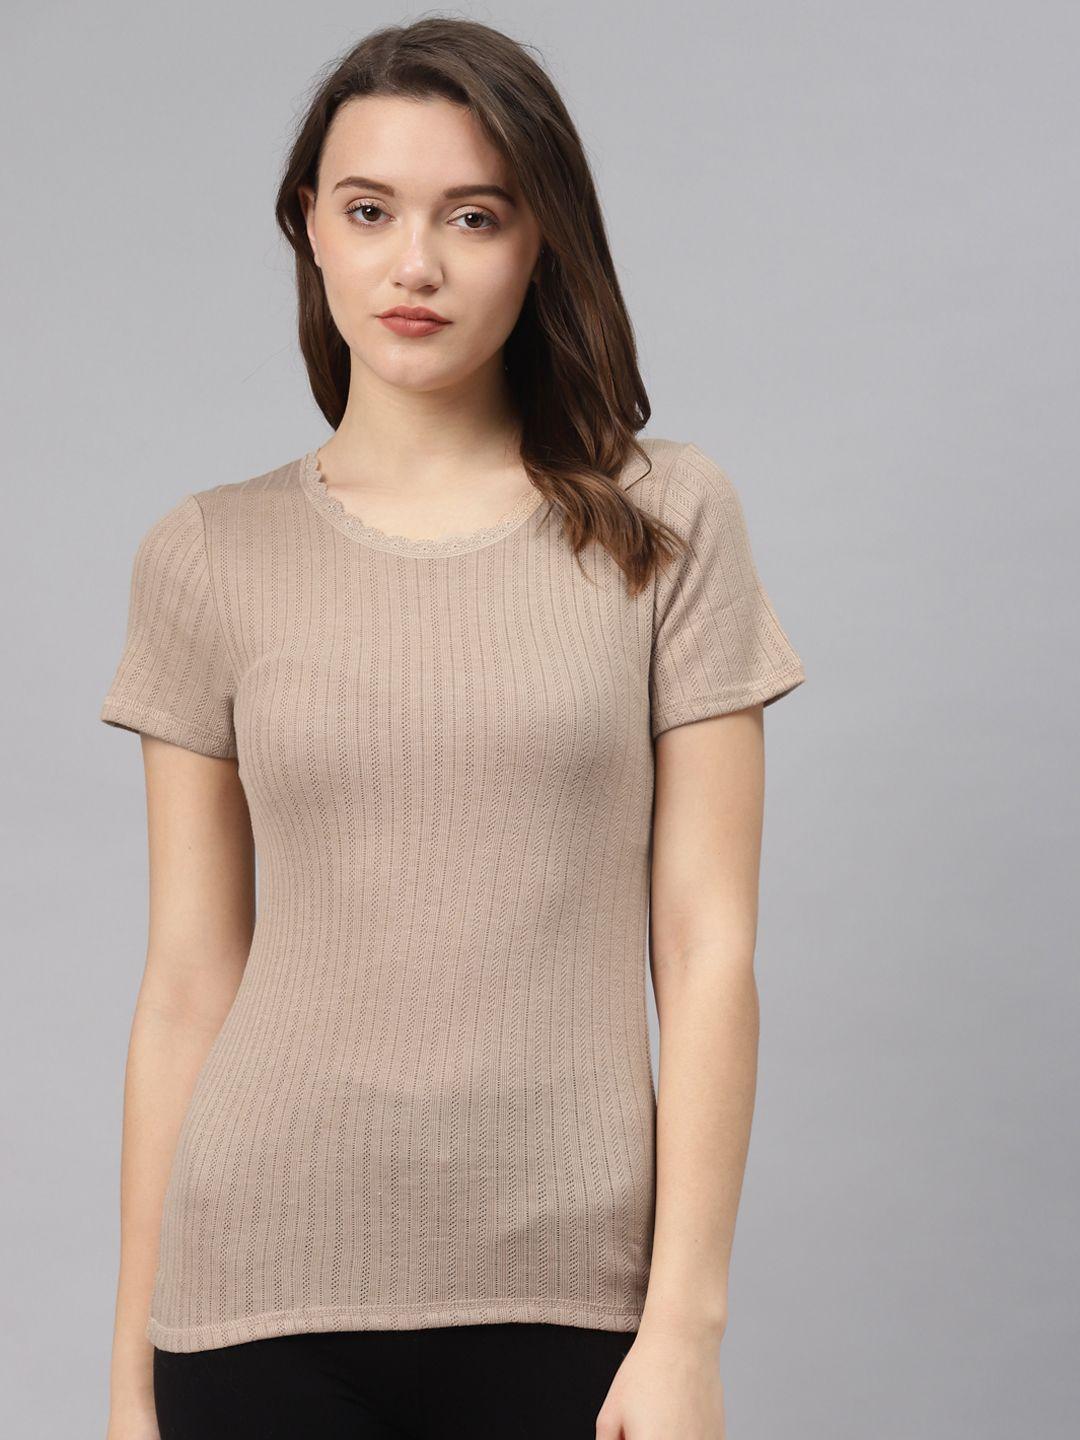 marks & spencer women beige self-striped fitted top